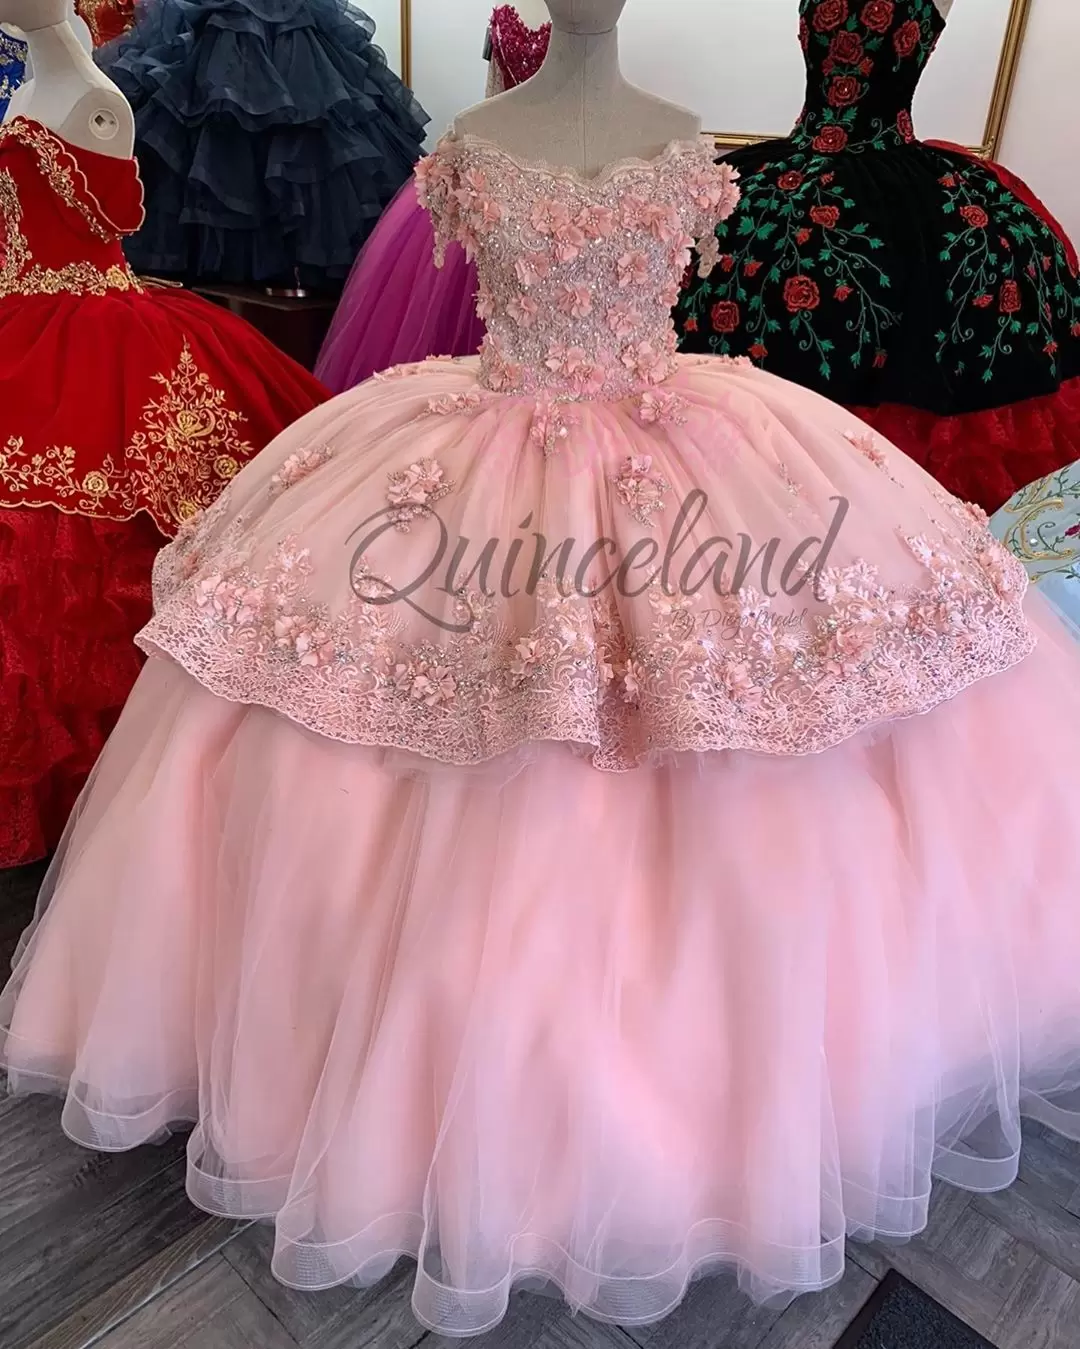 light pink quinceanera dress with sleeves,light pink sweet 15 dress,light pink quinceanera dress,pink quinceanera dress with sleeves,big pink quinceanera dress,pink sweet 15 dress,2 layer corset quinceanera dress,quinceanera dress midi cap sleeve,cap sleeves quinceanera dress,quinceanera dress with 3d flowers,quinceanera dress wholesale price,